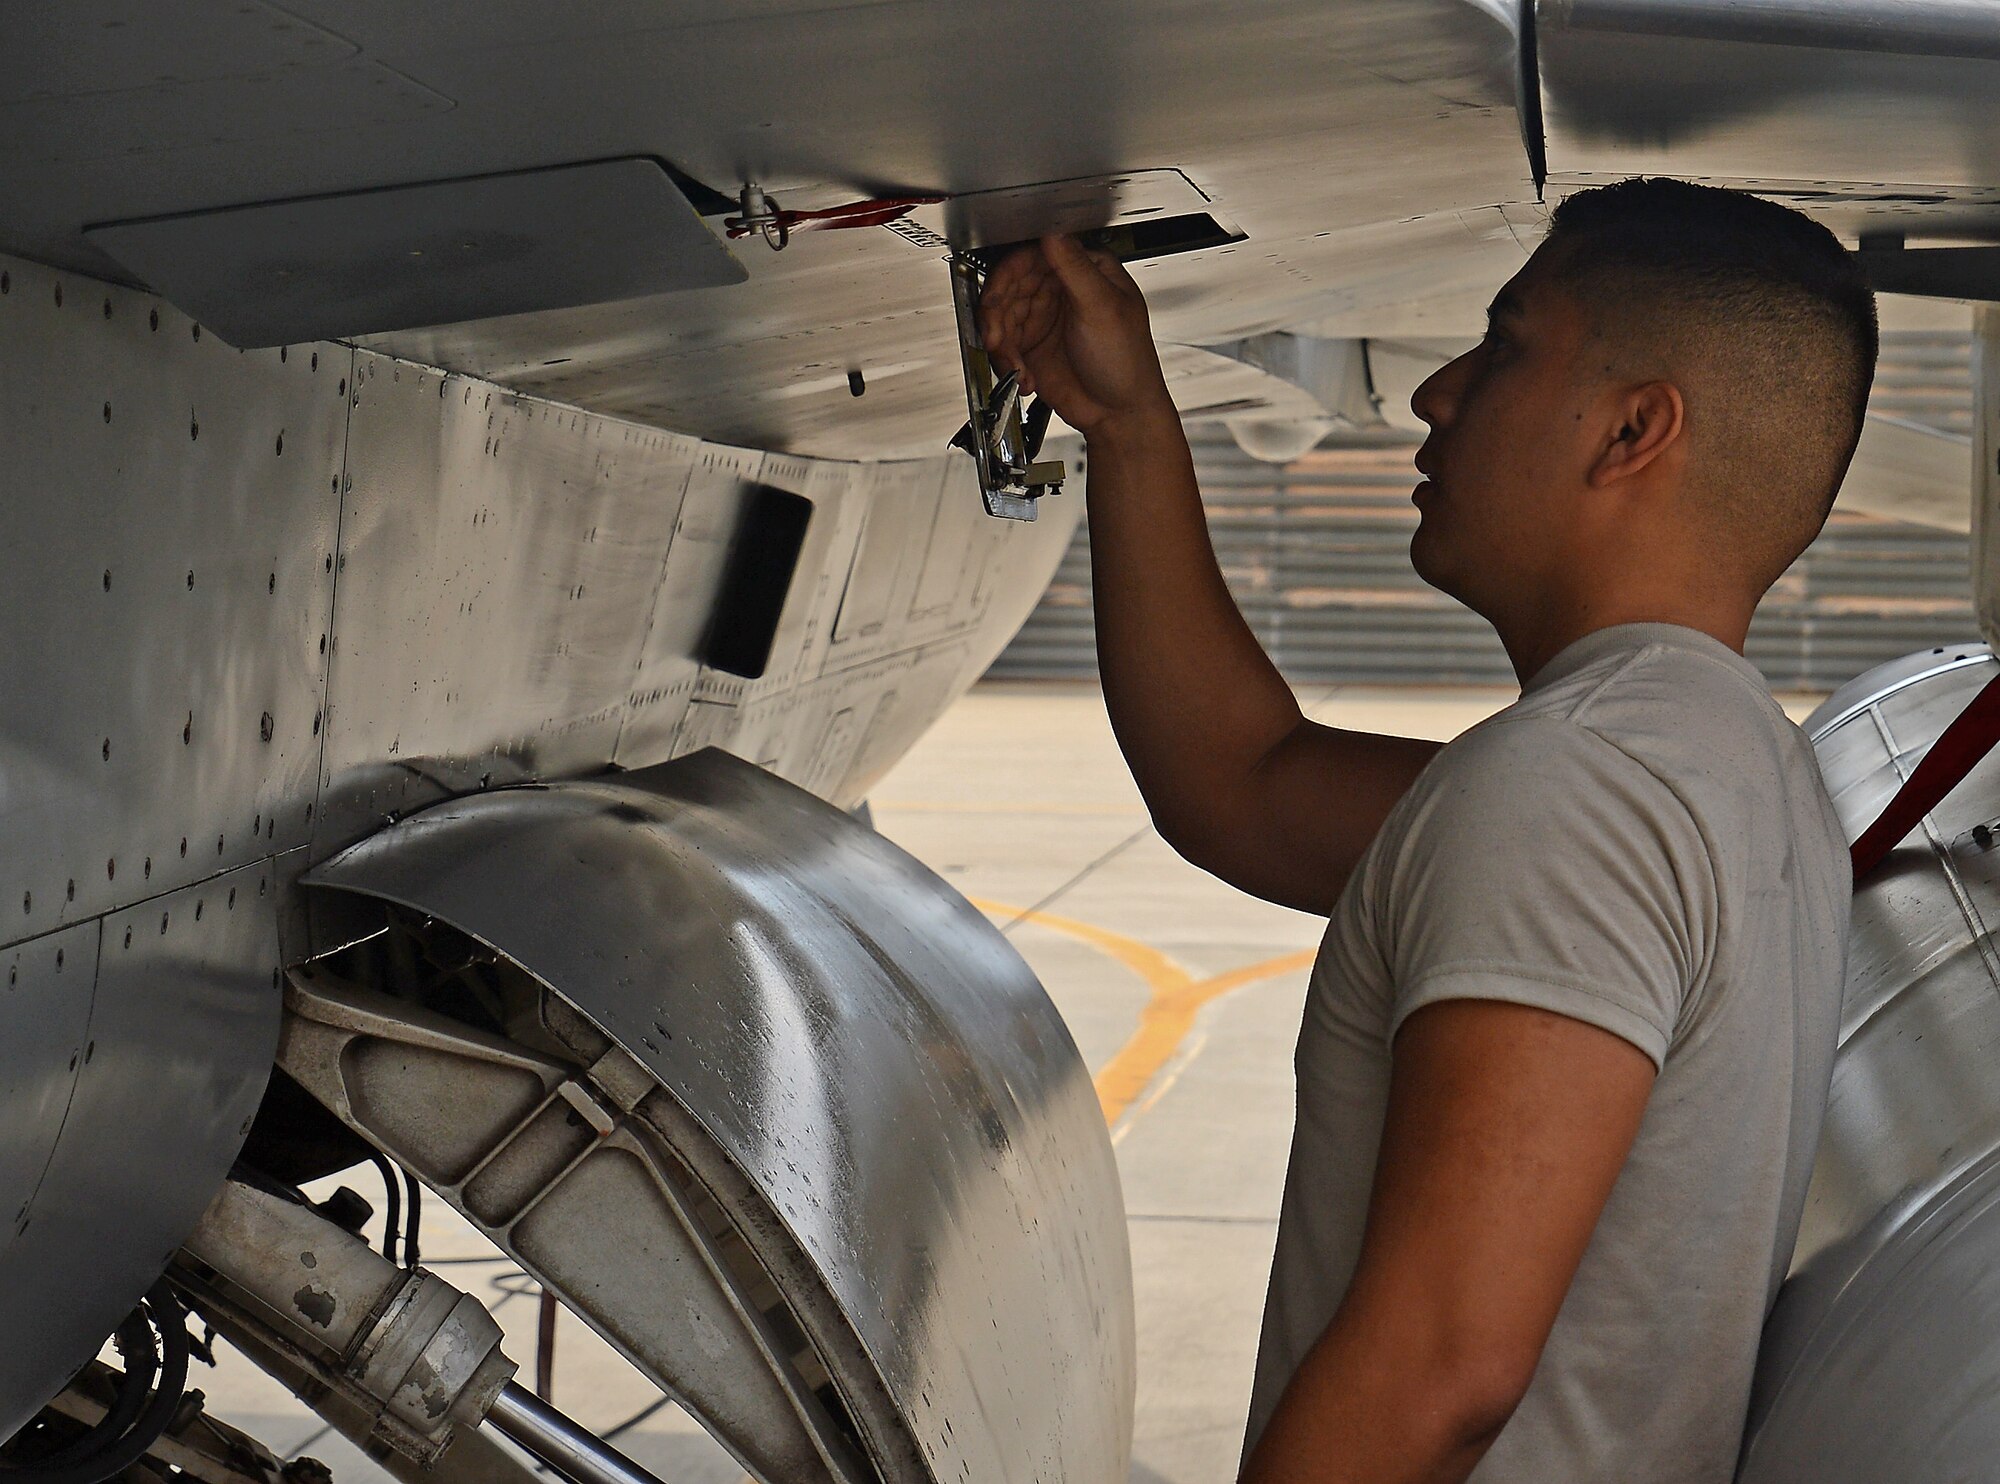 Senior Airman Kevin Zaragoza, 455th Expeditionary Aircraft Maintenance Squadron F-16 Fighting Falcon crew chief, inspects a gear box on an F-16 Mar. 20, 2018 at Bagram Airfield, Afghanistan.